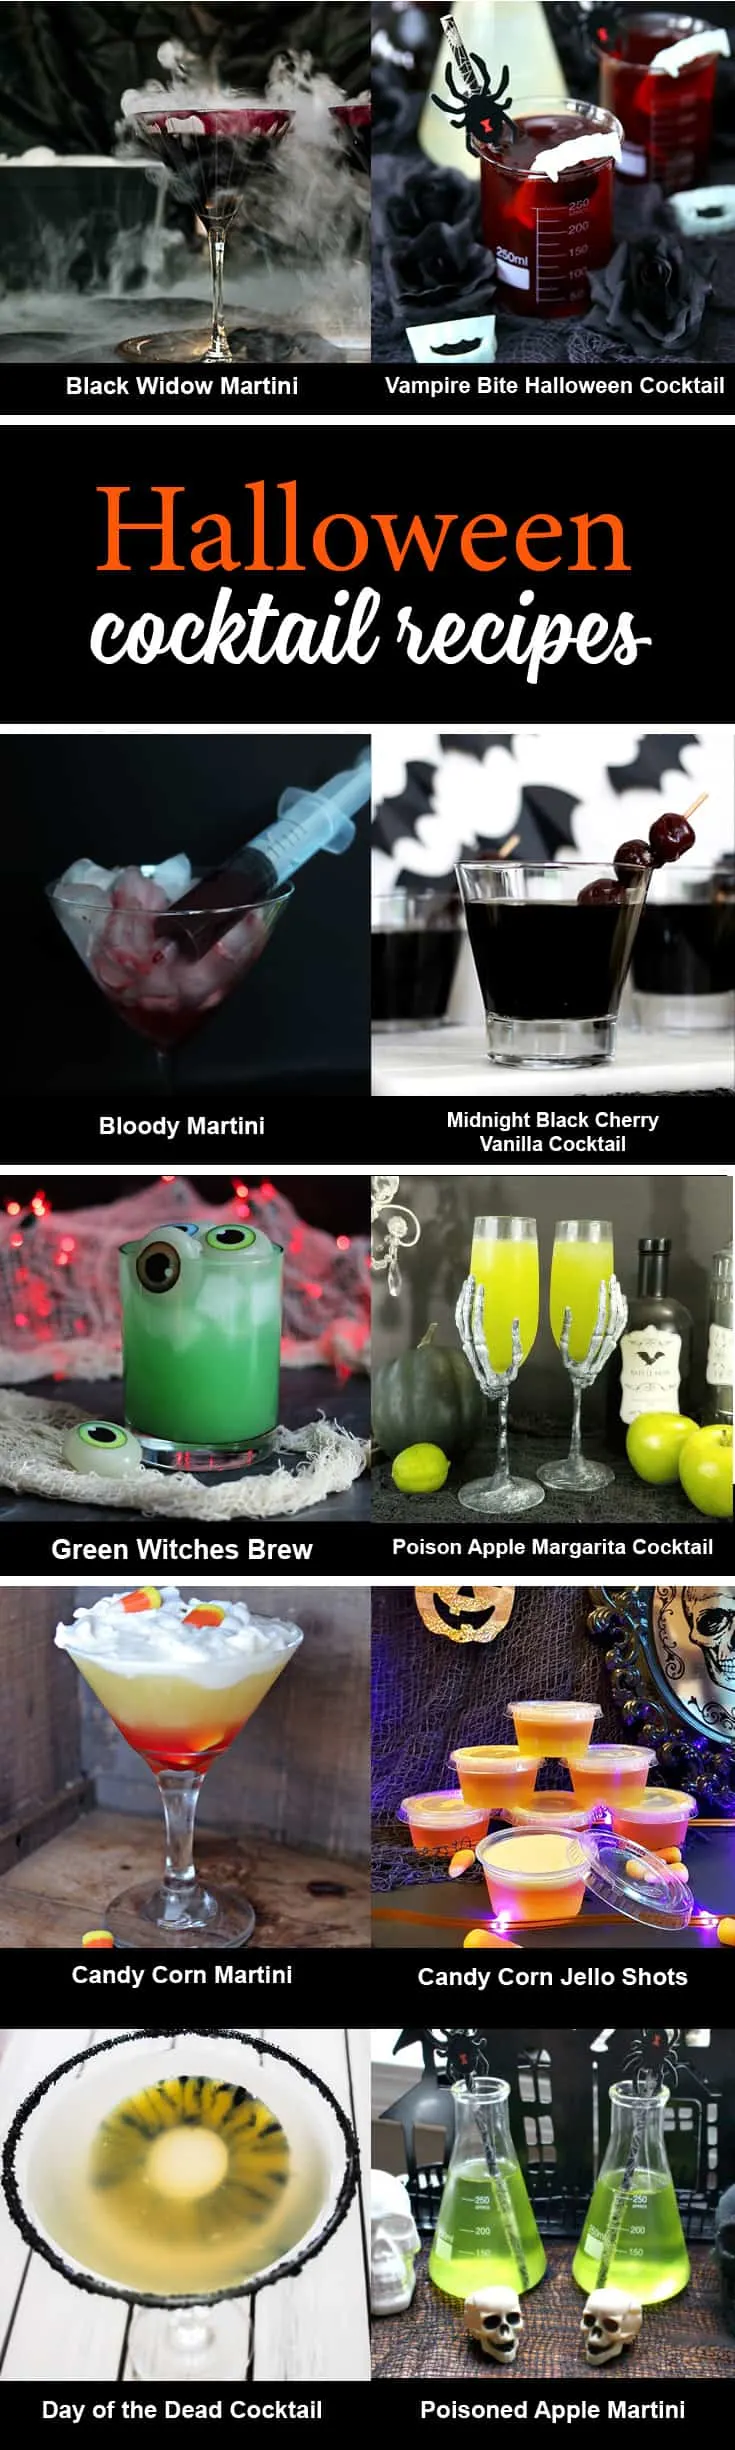 Take a sip of the apple margarita cocktail. It will make you pucker up and say "yum" - www.michellejdesigns.com #michellejdesigns #fallcocktails #halloweendrinks #halloweencocktail #applemargarita #applecocktail